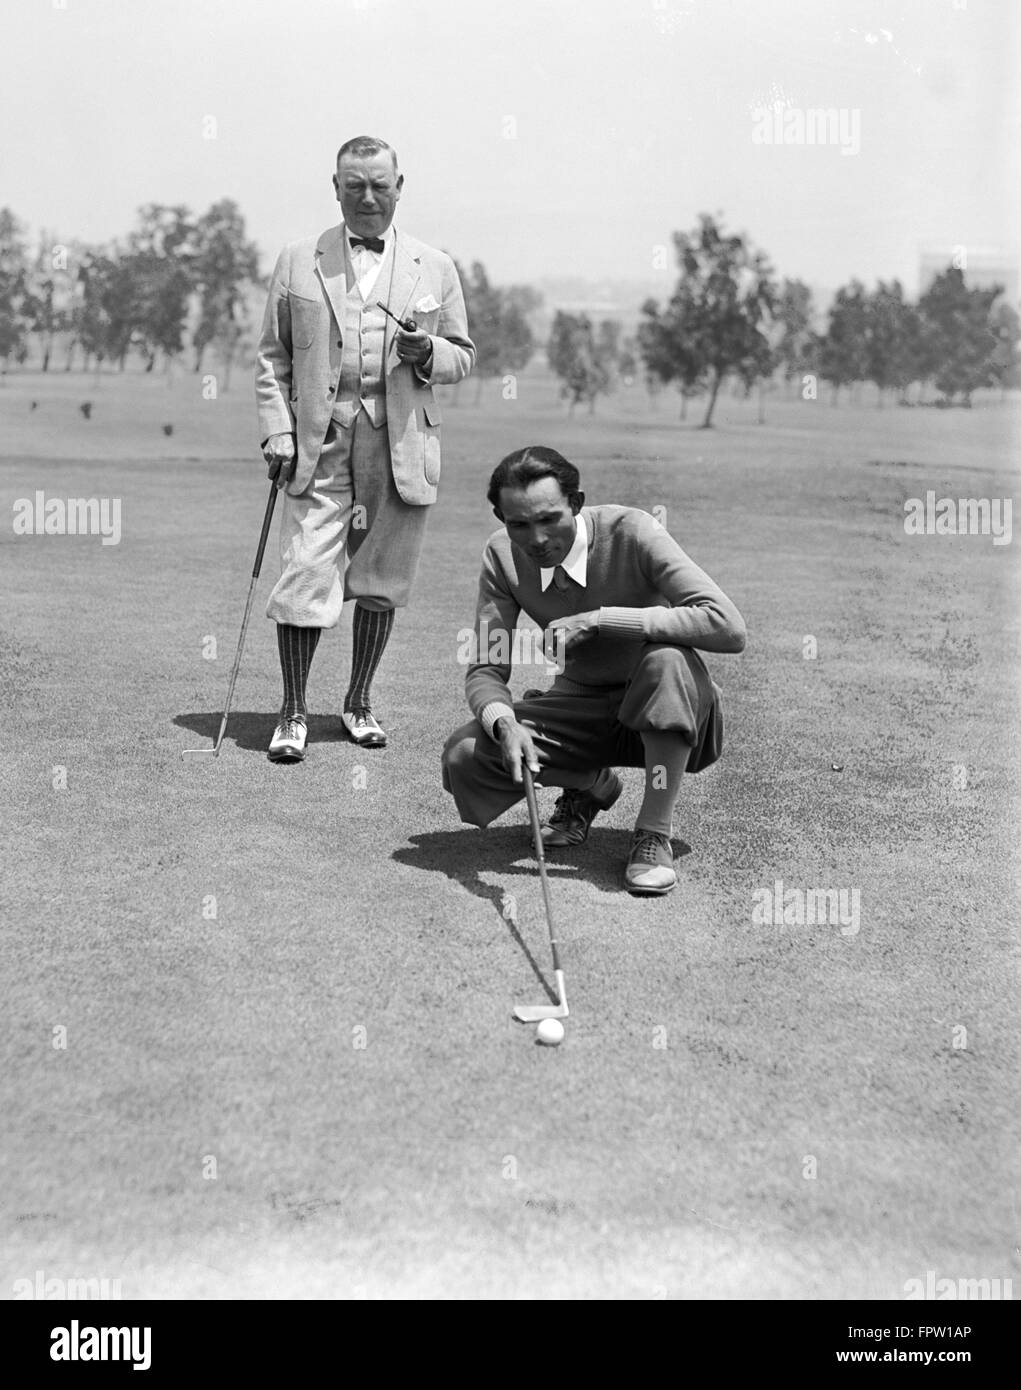 1920s TWO MEN WEARING PLUS FOURS PLAYING GOLF ONE MAN SMOKING PIPE OTHER MAN KNEELING BY GOLF BALL LINING UP PUTT Stock Photo